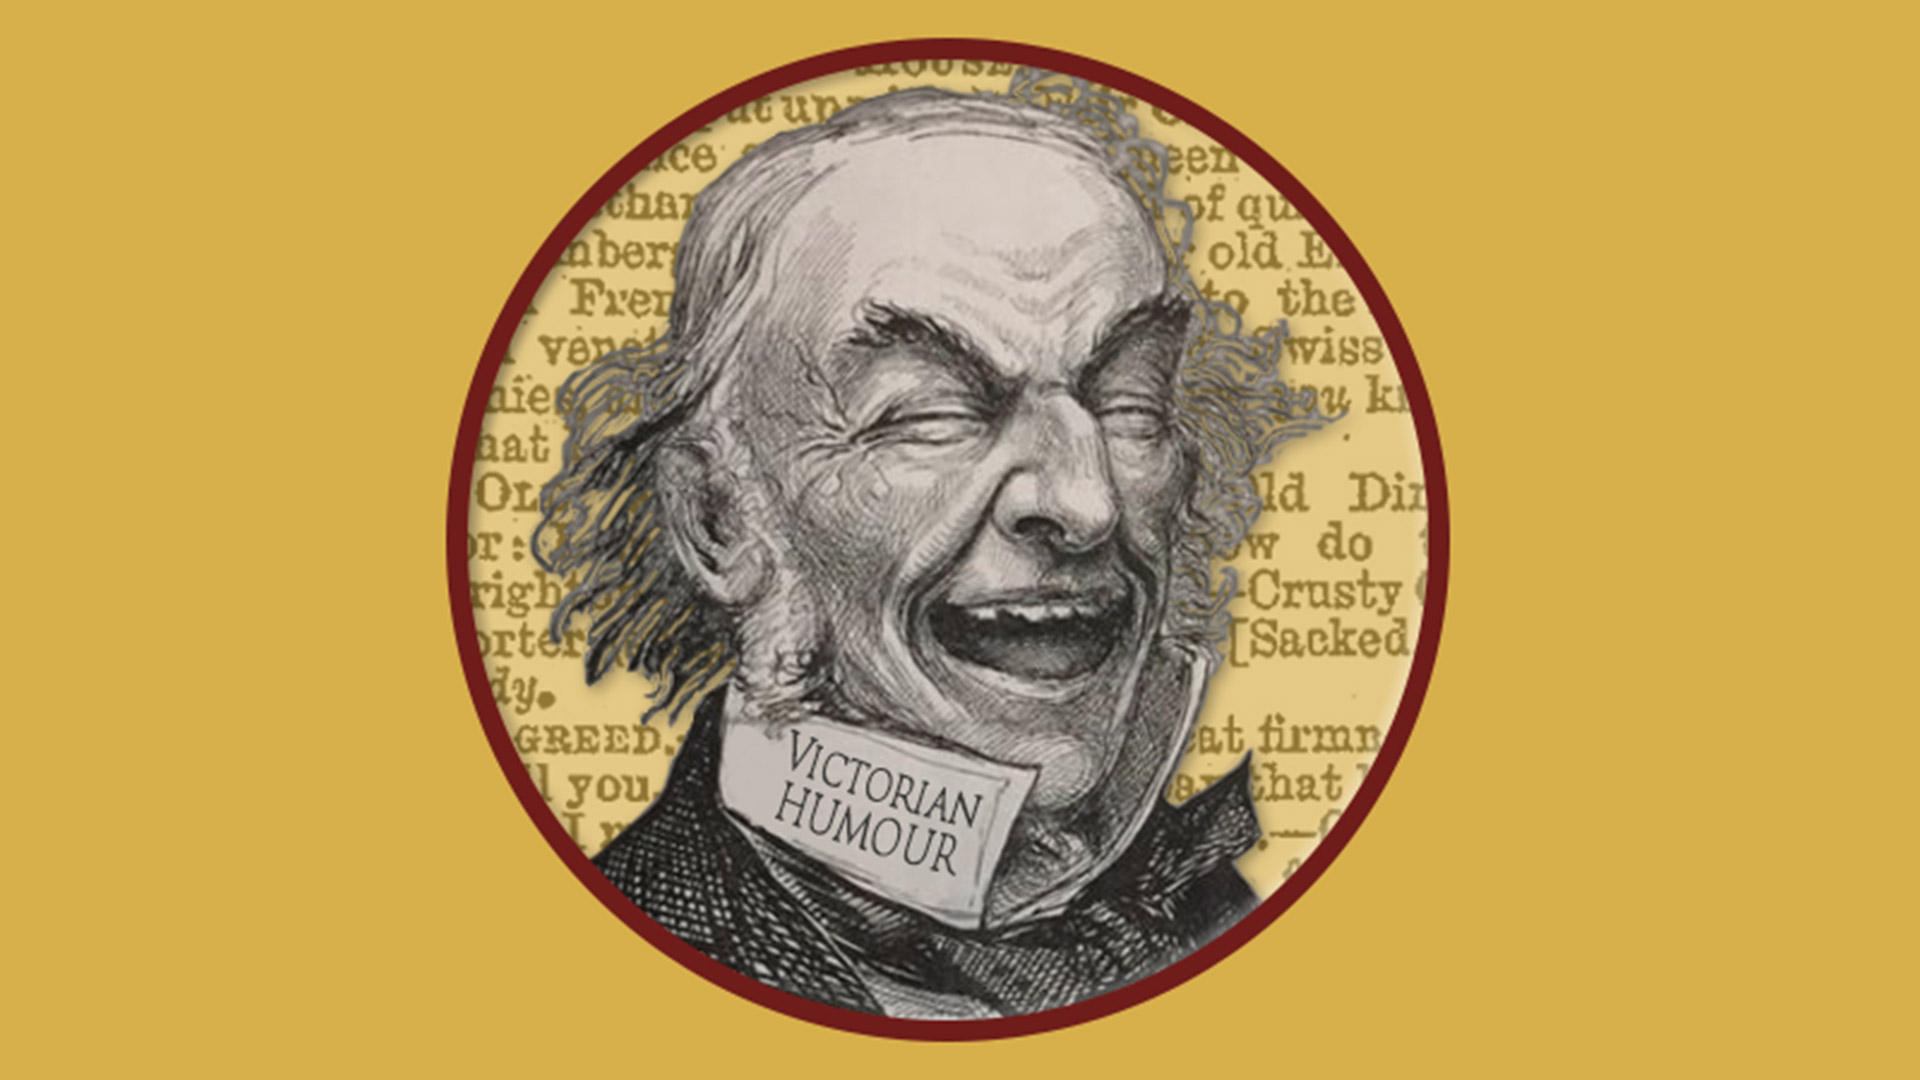 Victorian Humour laughing face logo